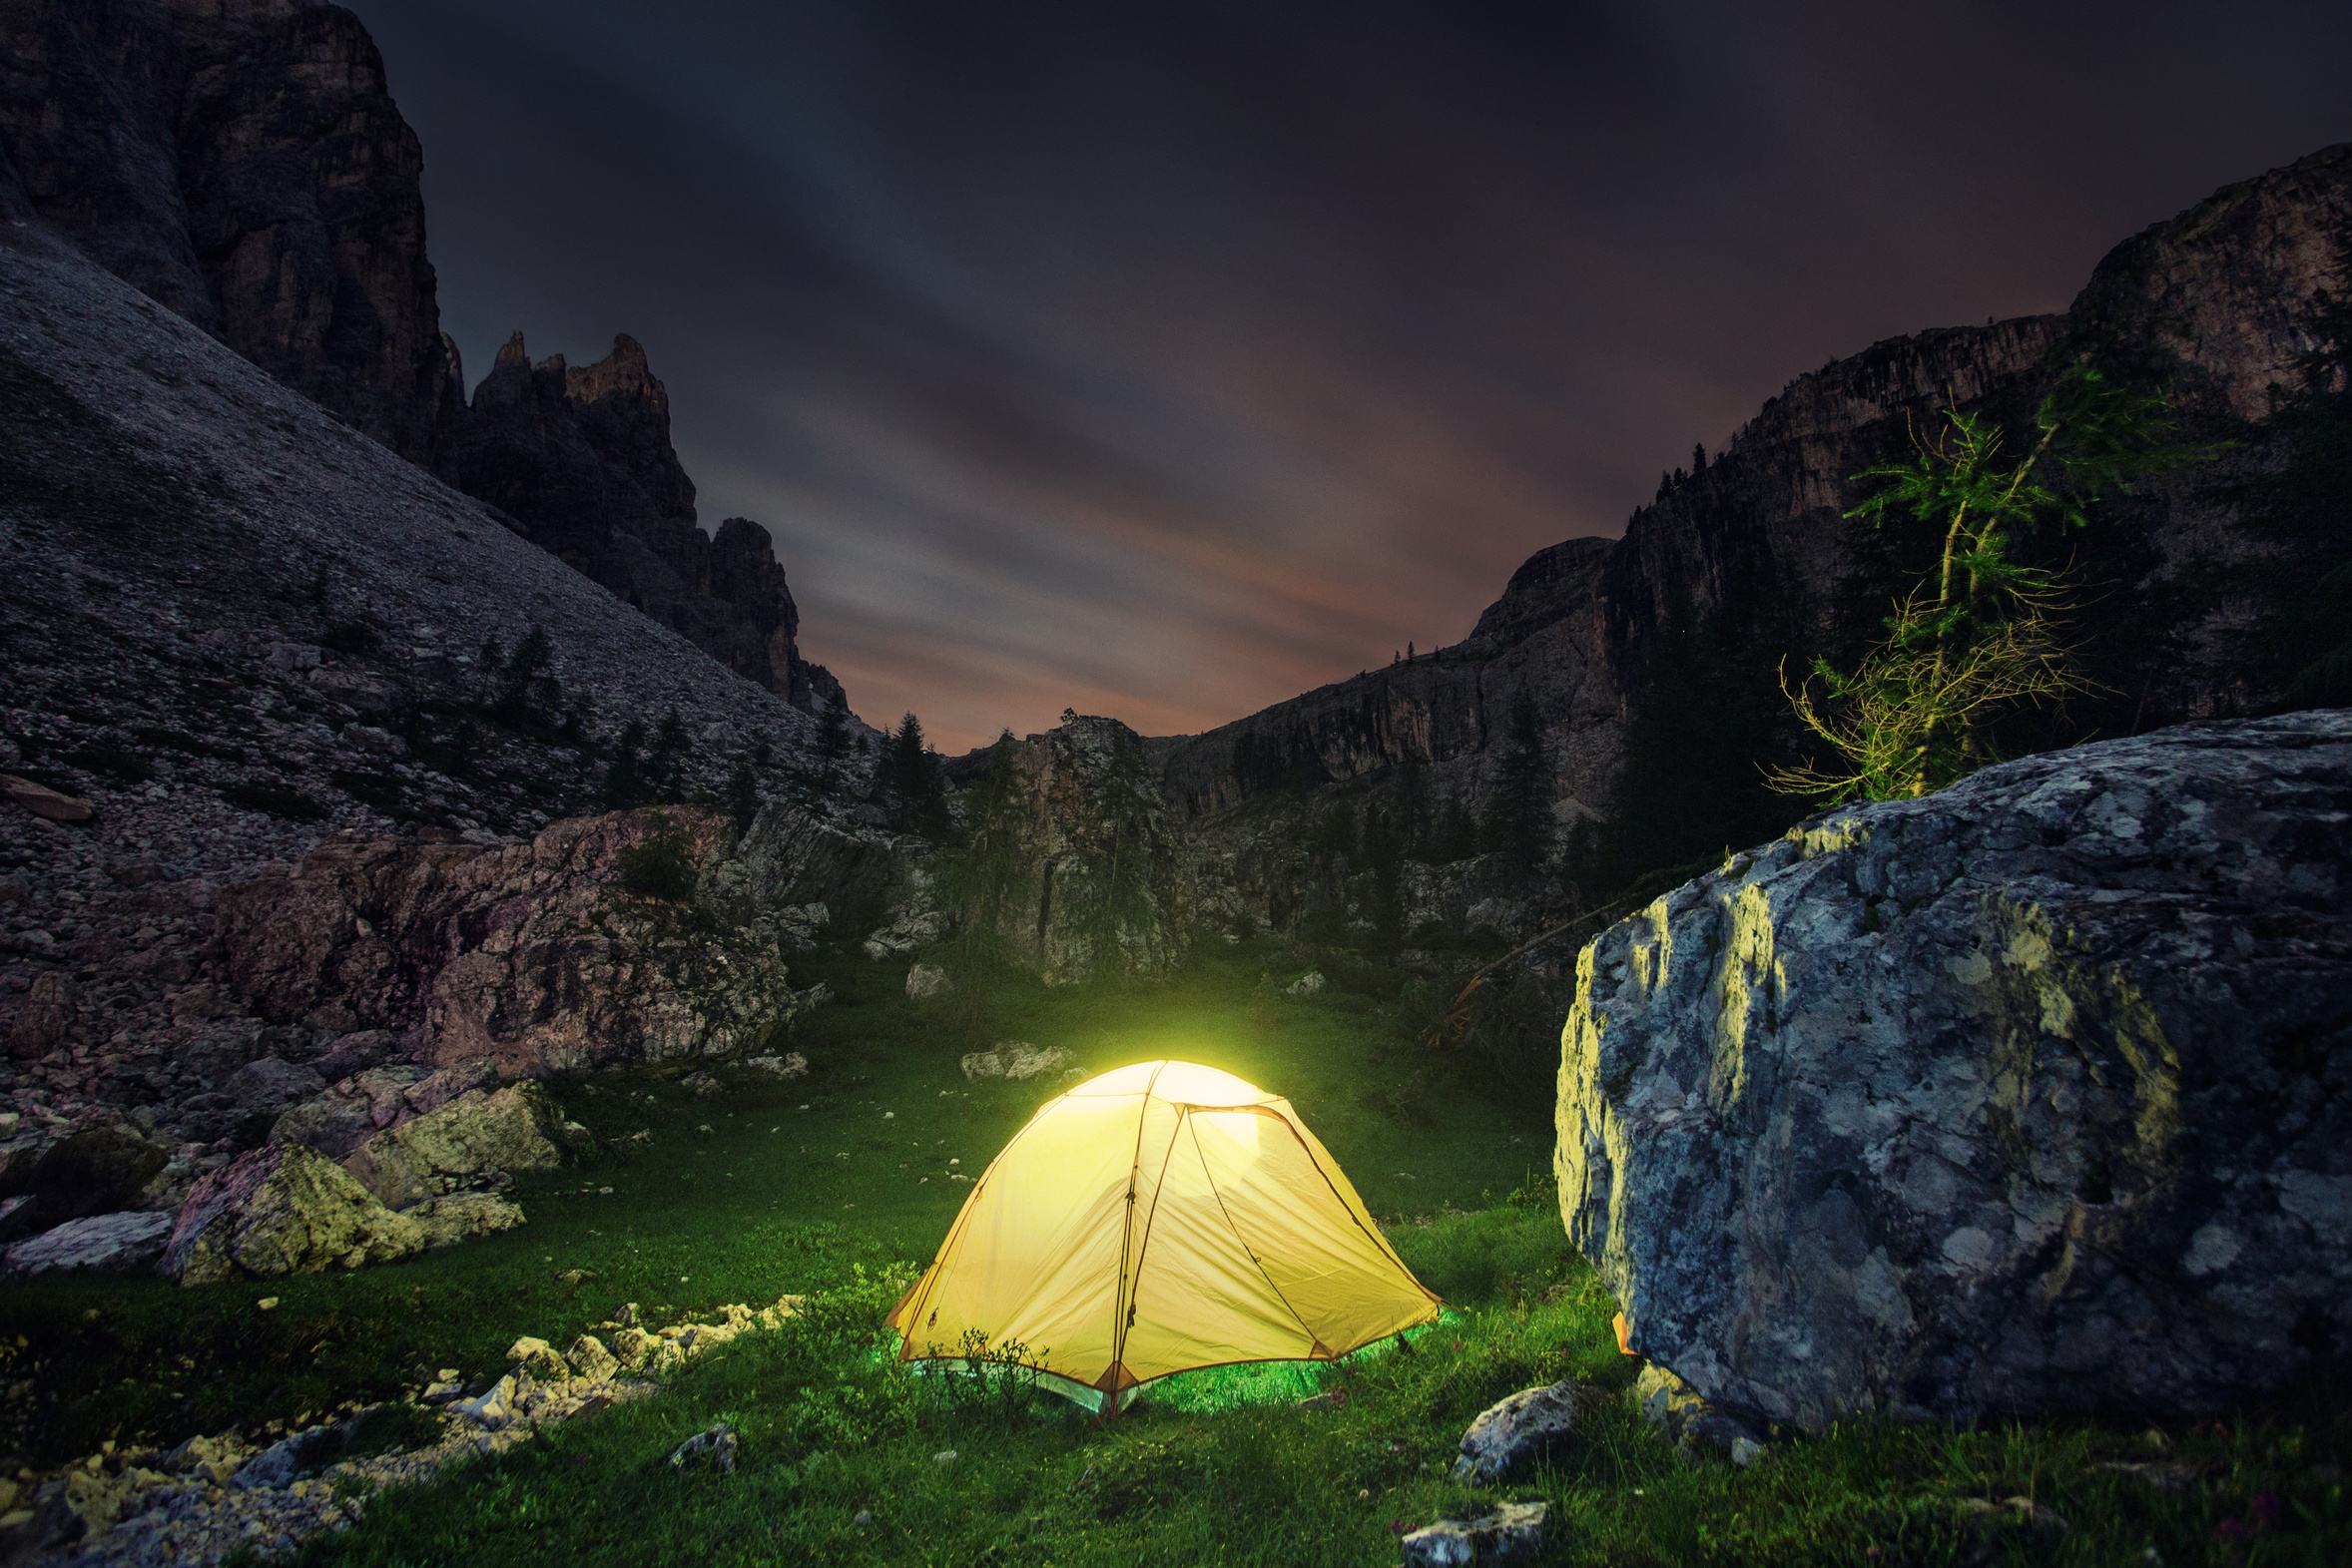 Tent illuminated at night pitched by rocky mountains